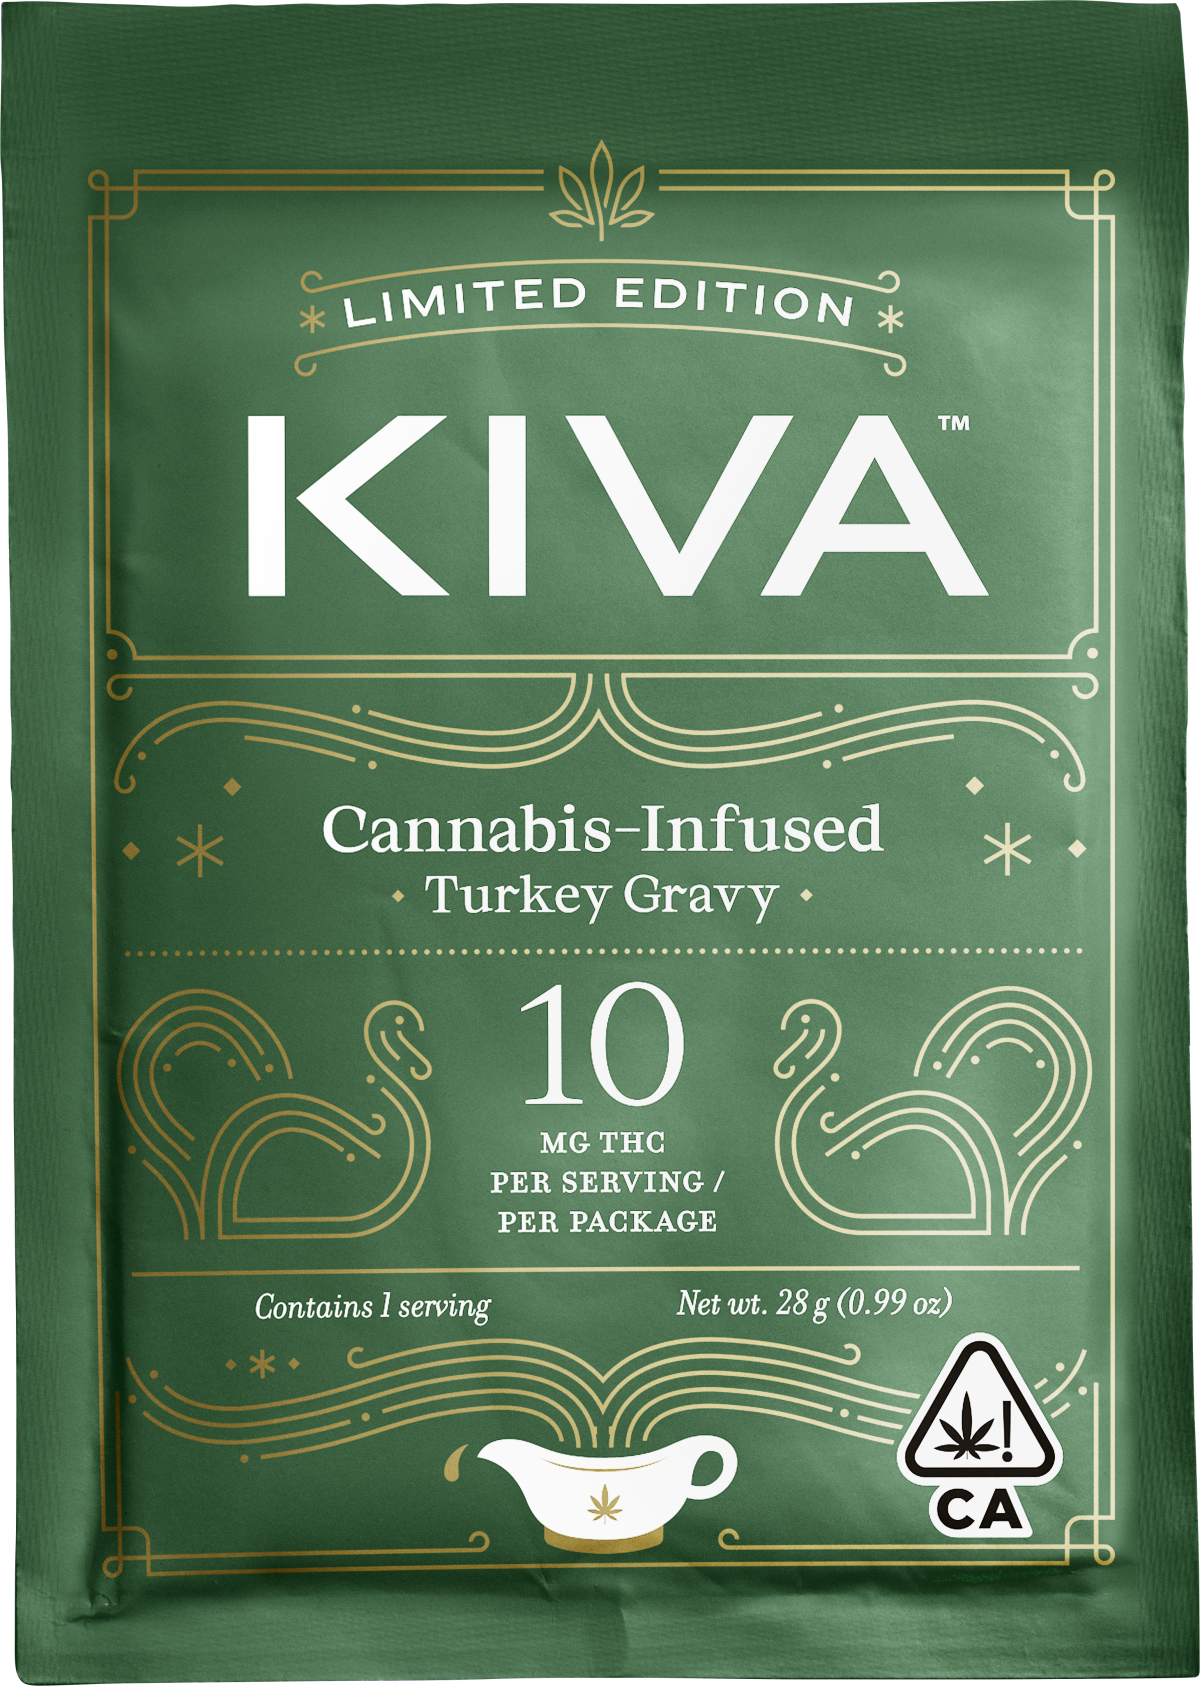 A green rectangular packet of cannabis-infused gravy with white lettering on the front.